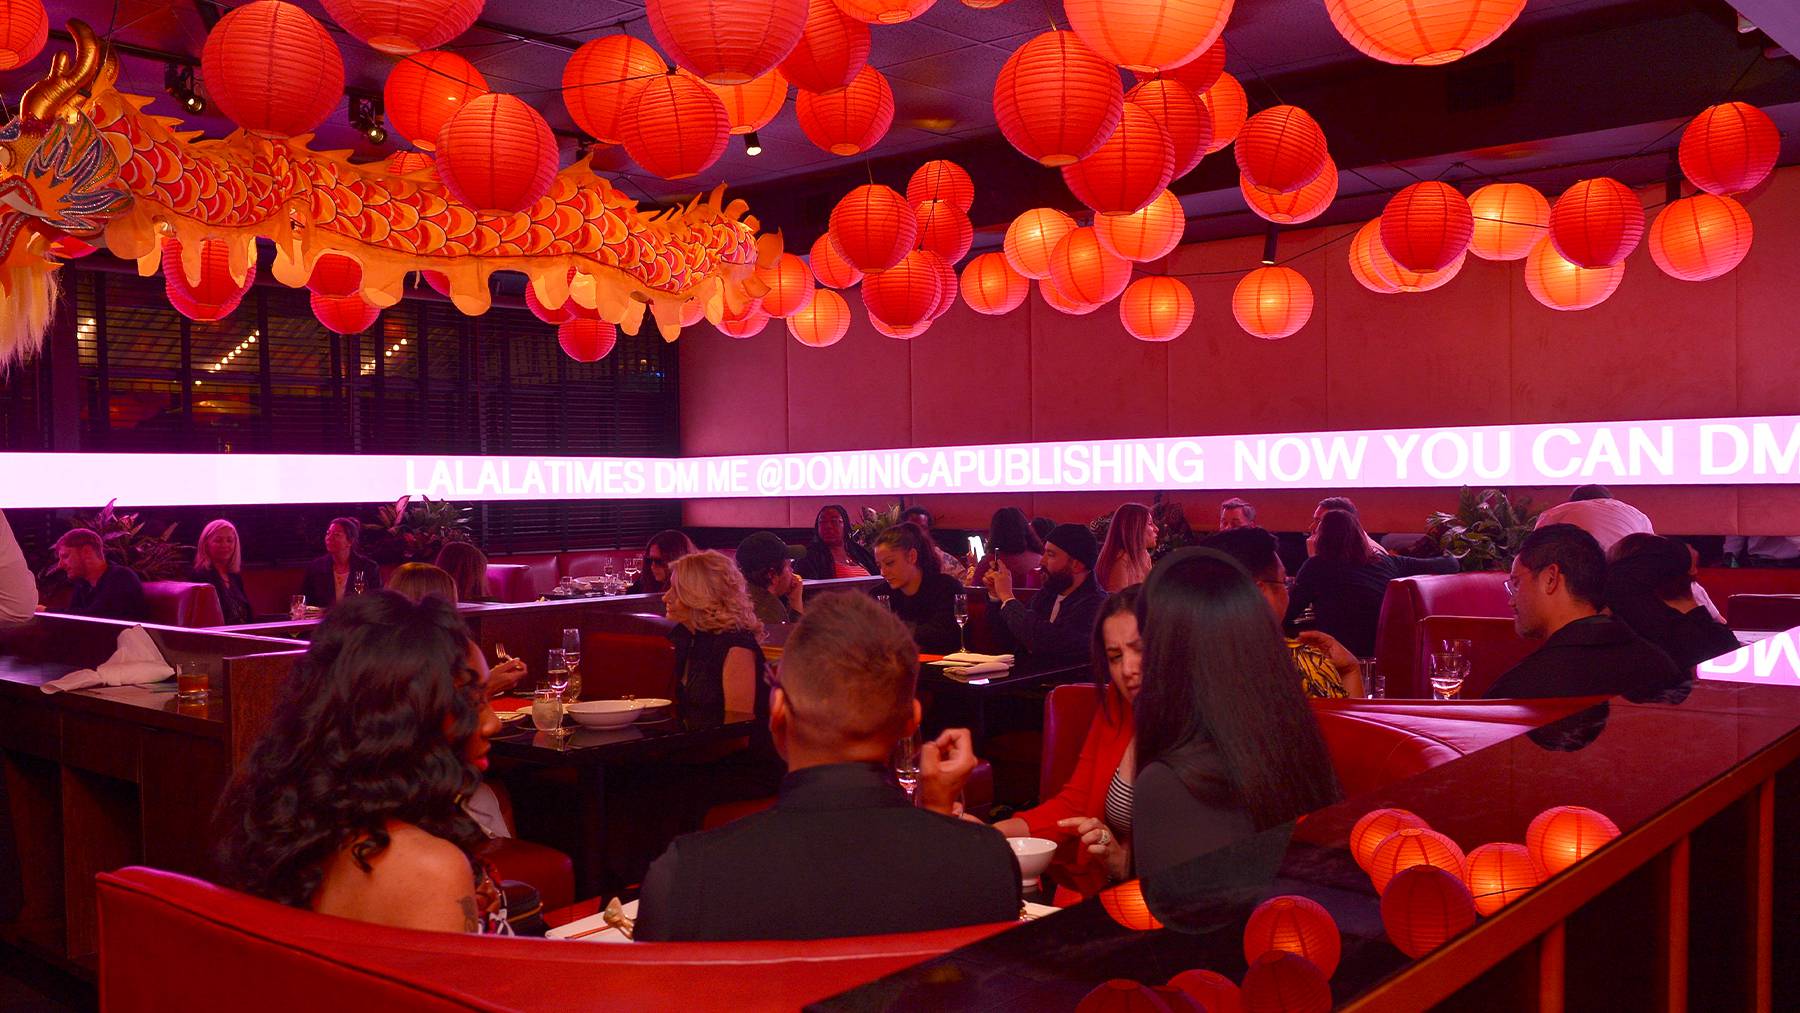 A private dinner in honor of Martine Syms at Genghis Cohen, part of Prada's event at Frieze LA.